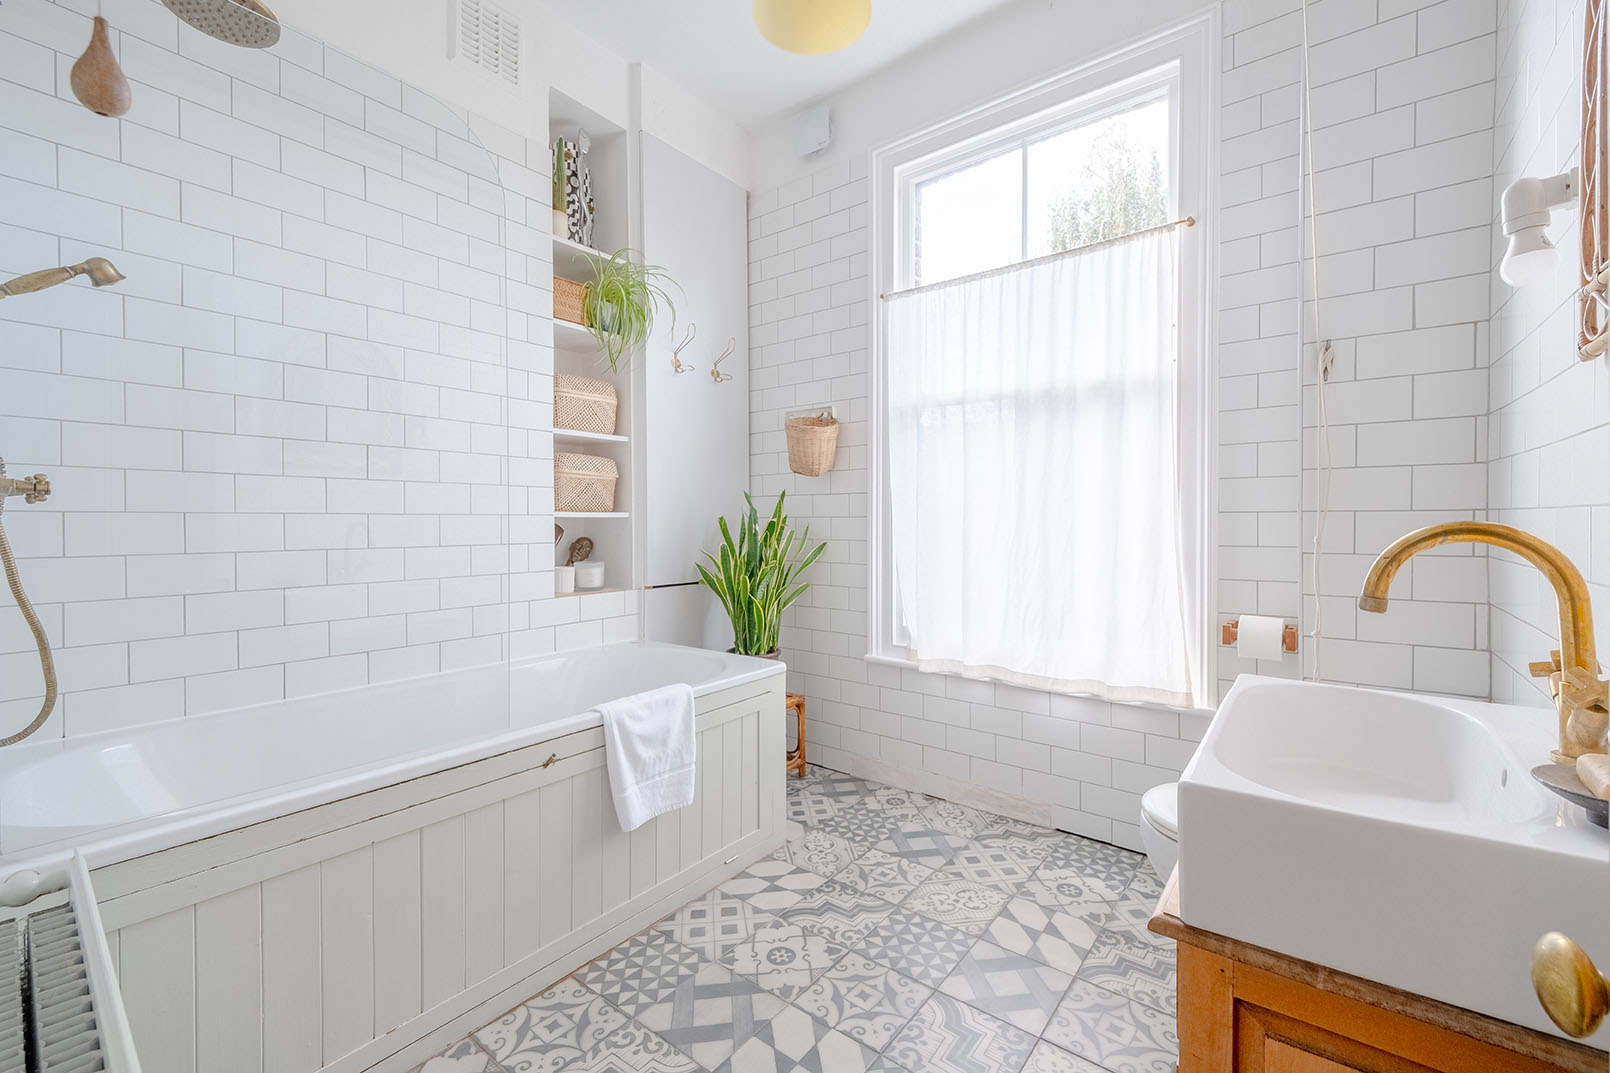 A large bathroom with white tiles, grey patterned floor tiles and a large window taking lots of daylight inside, taken for property photography.